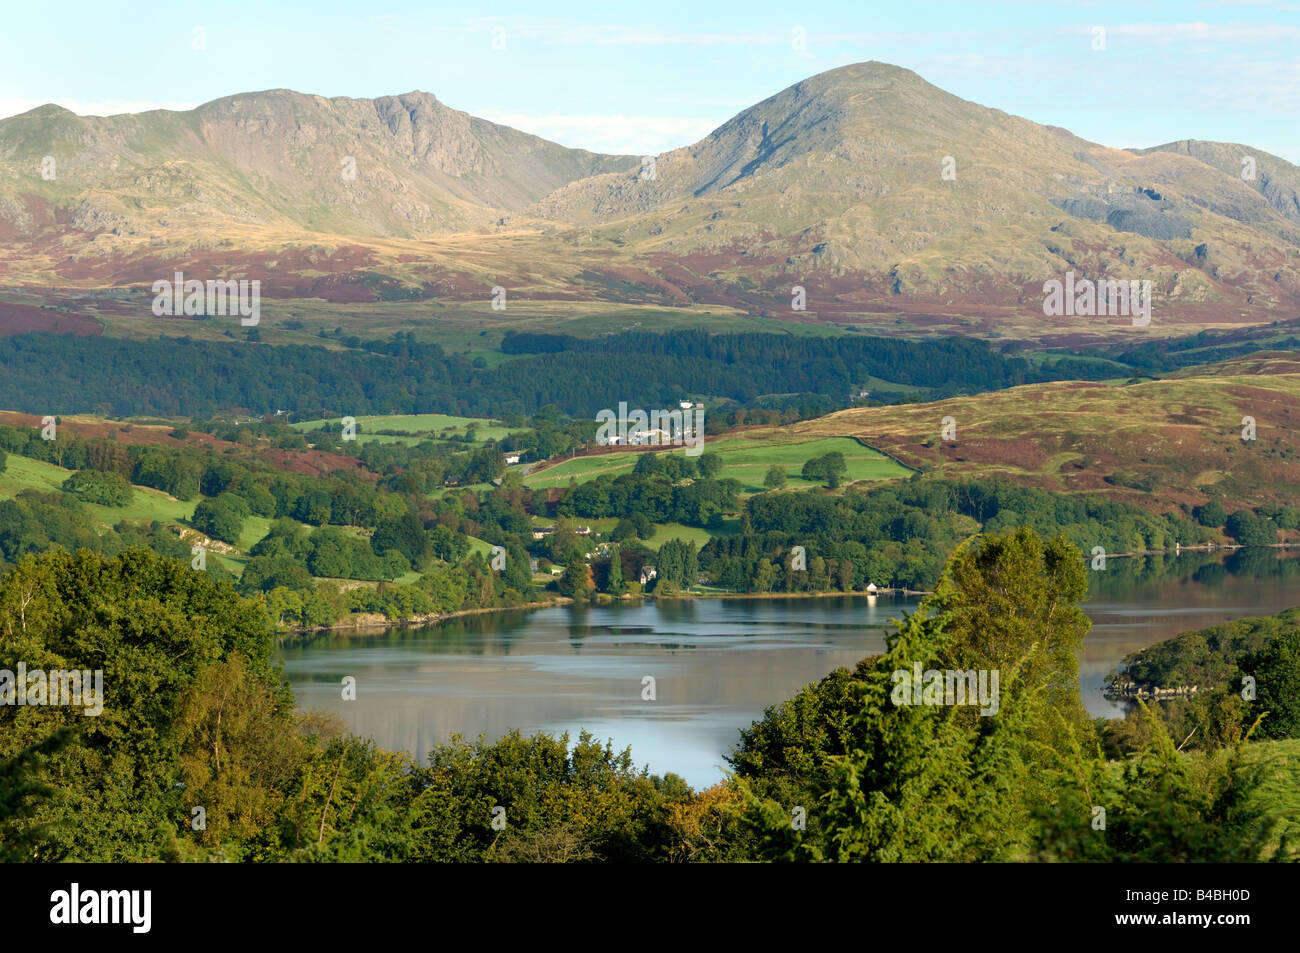 A scenic view of Coniston Water, The Old Man of Coniston, Walna Scar and the Coniston fells Stock Photo